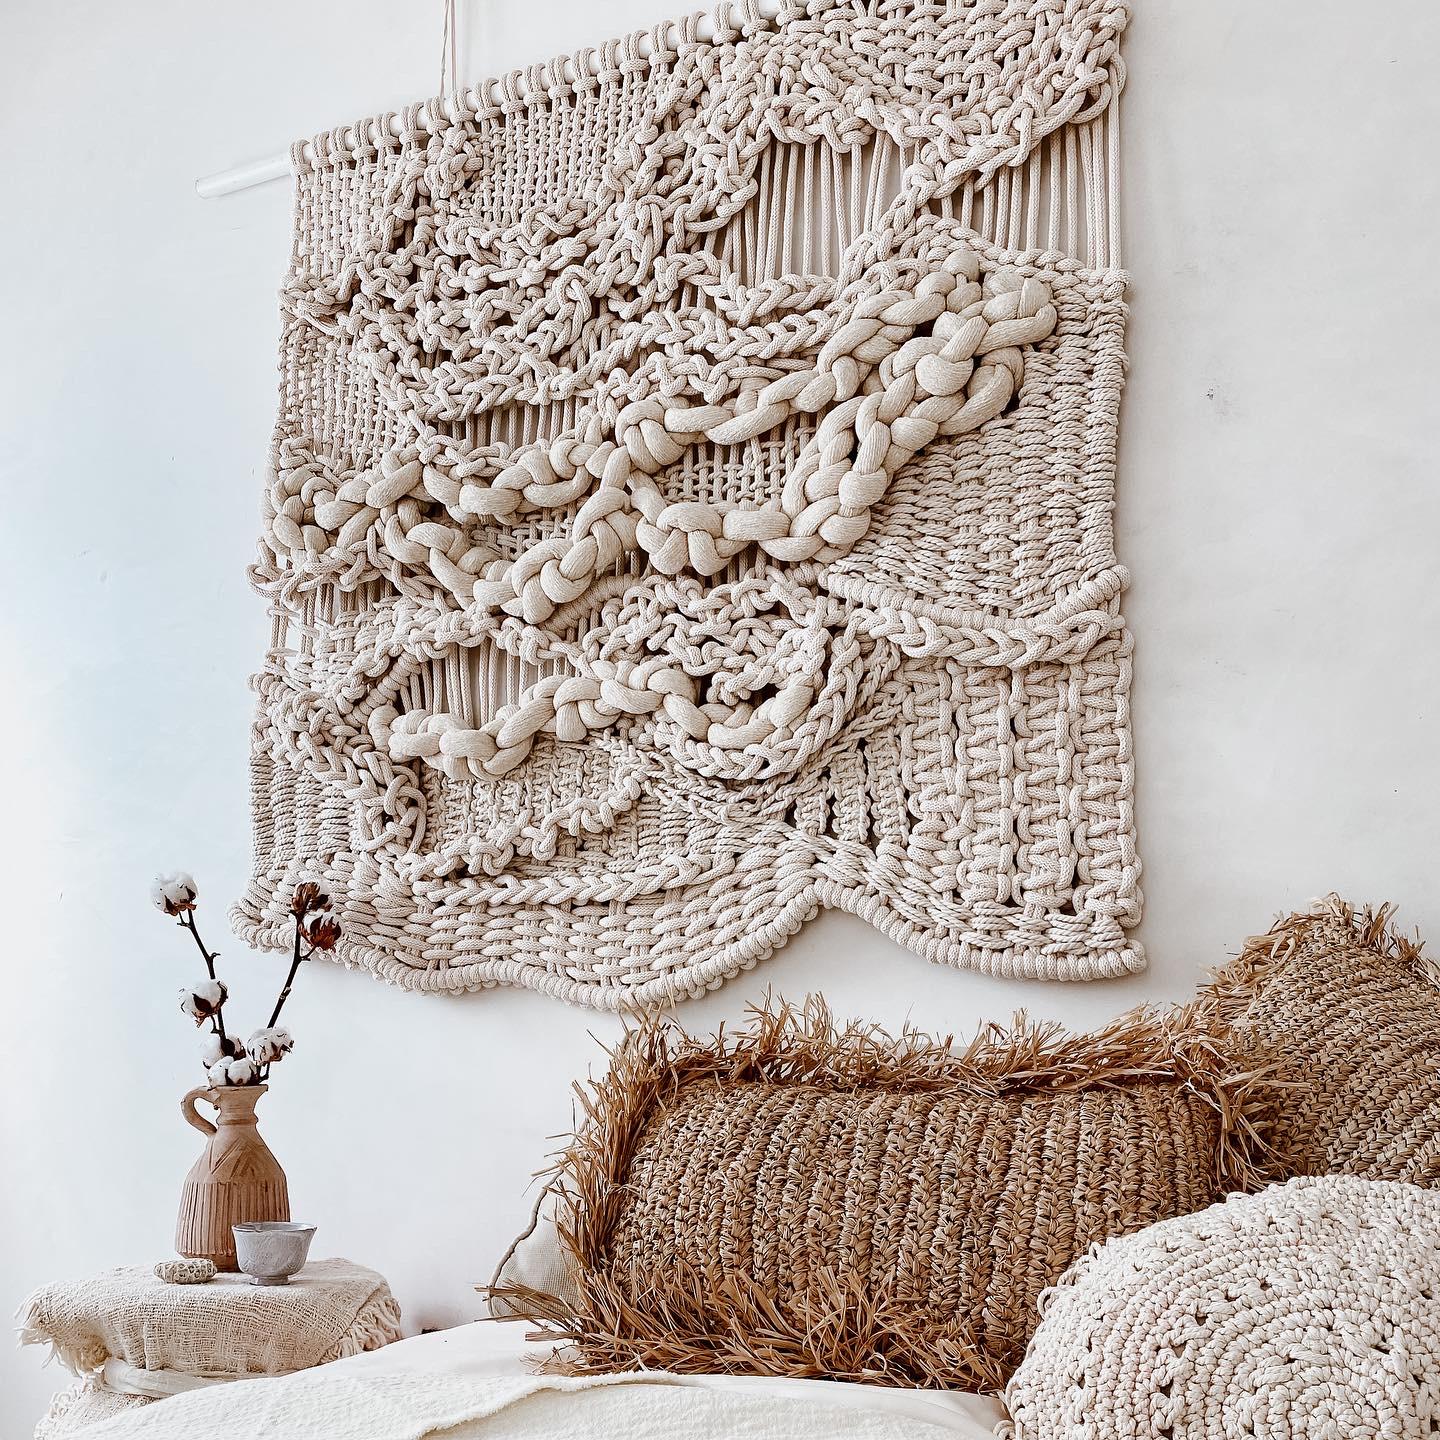 Extreme Macrame Wall Art made combining different traditional textiles like weaving and macrame.
This tapestry was delicately hand knotted with natural materials for a Eco-Friendly Home Living in my home studio based in Galicia (Spain)

Our homes